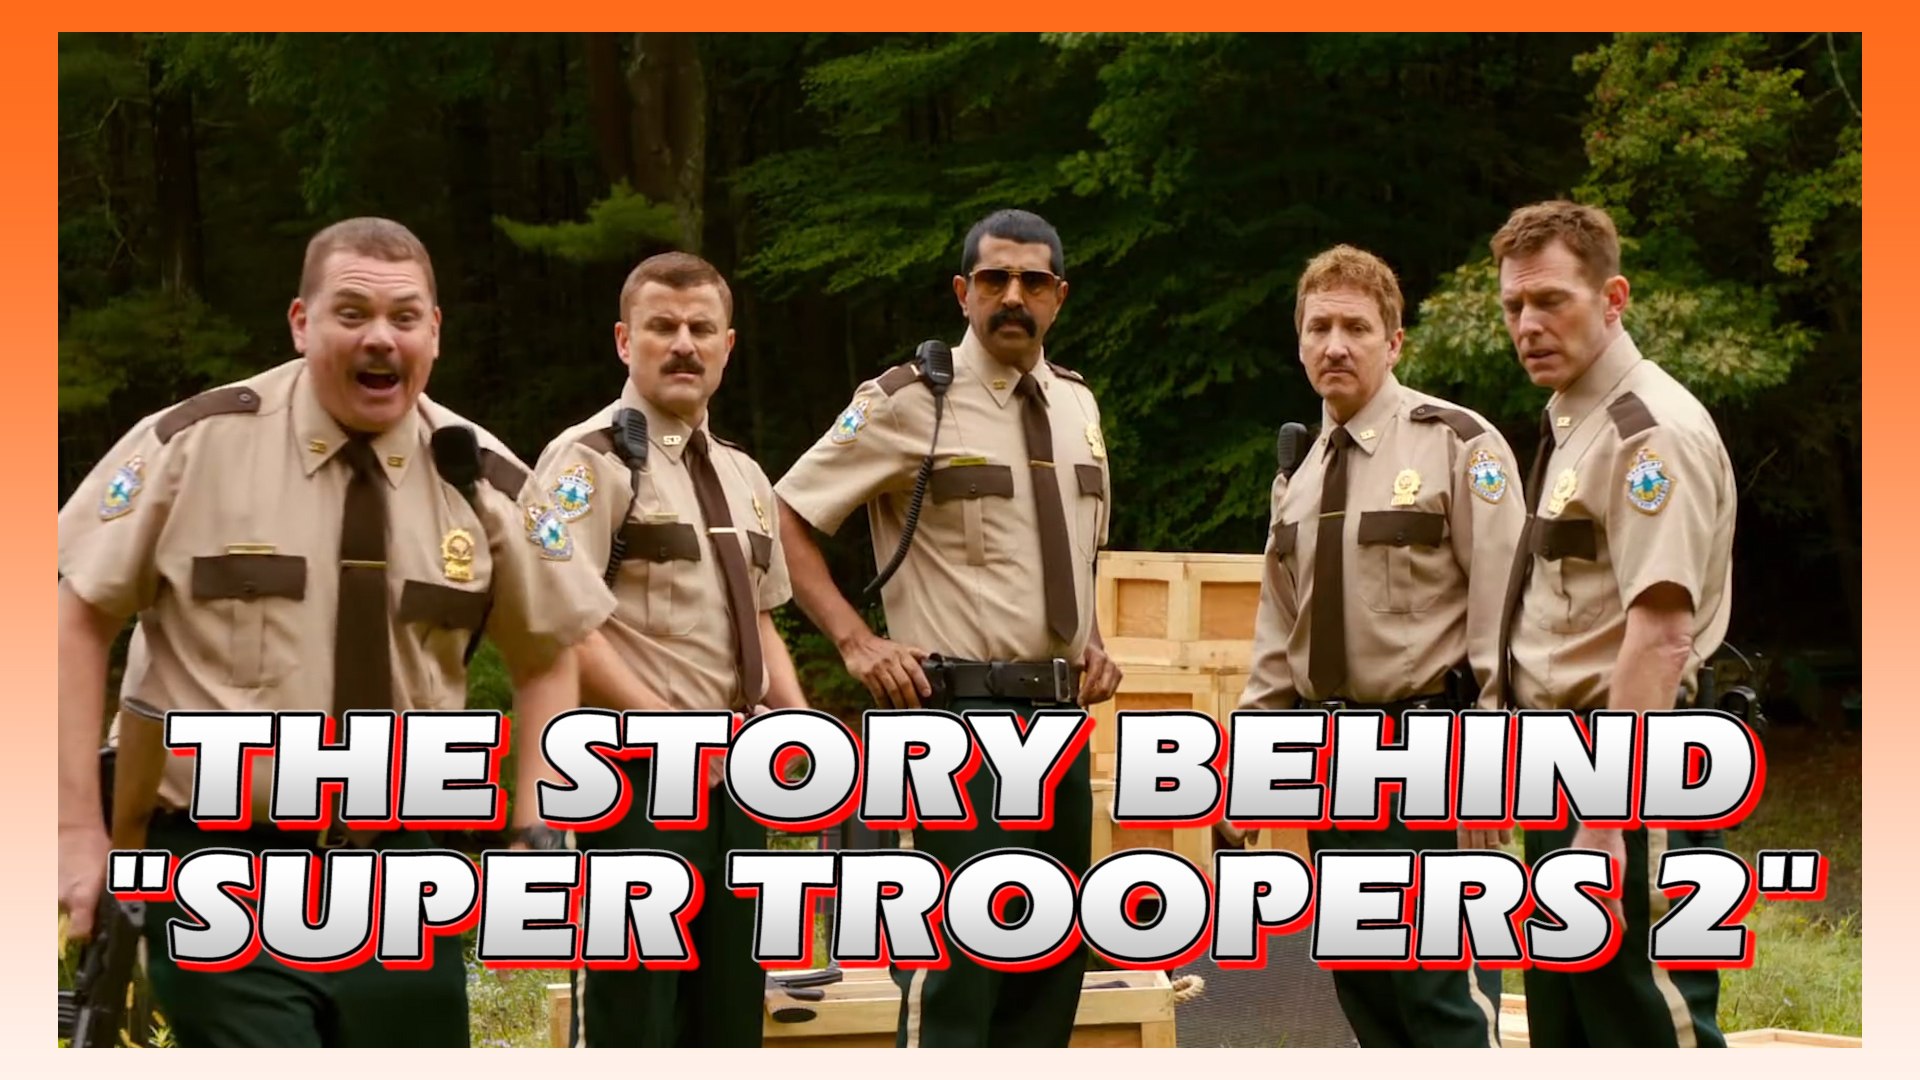 Super Troopers 2 Download Free